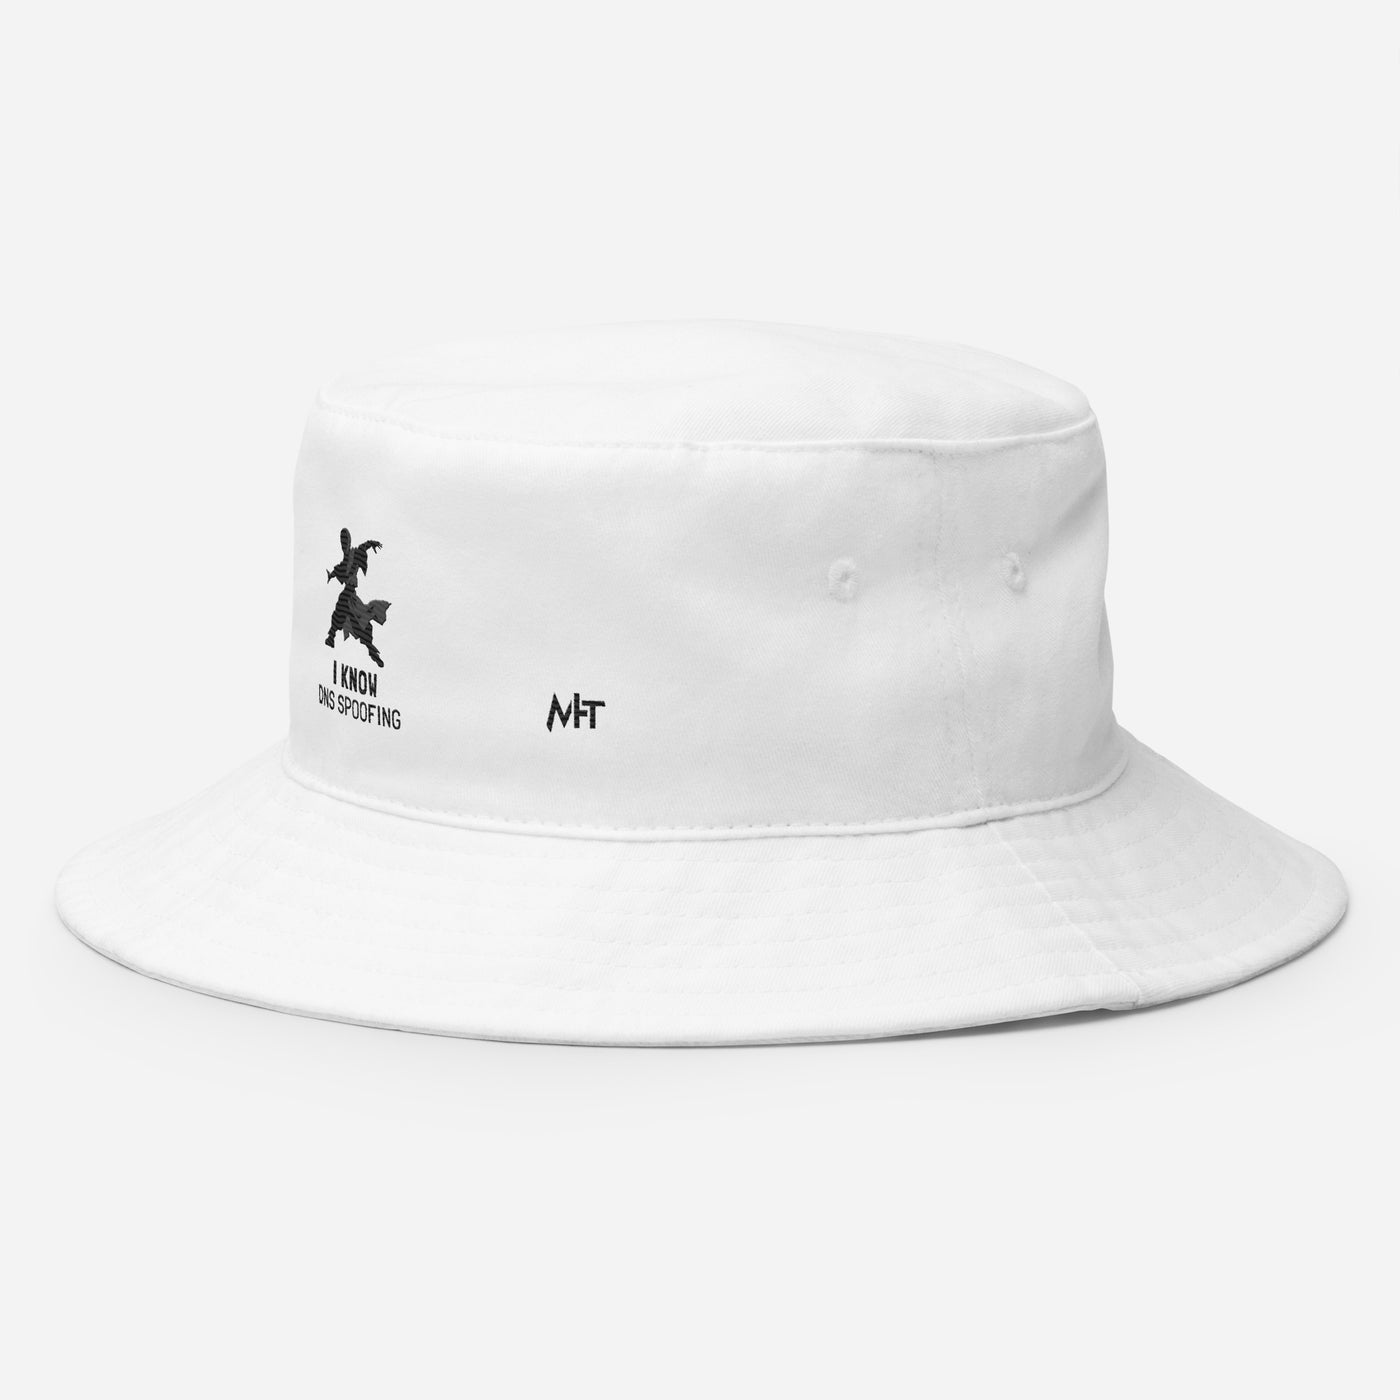 I Know DNS Spoofing - Bucket Hat